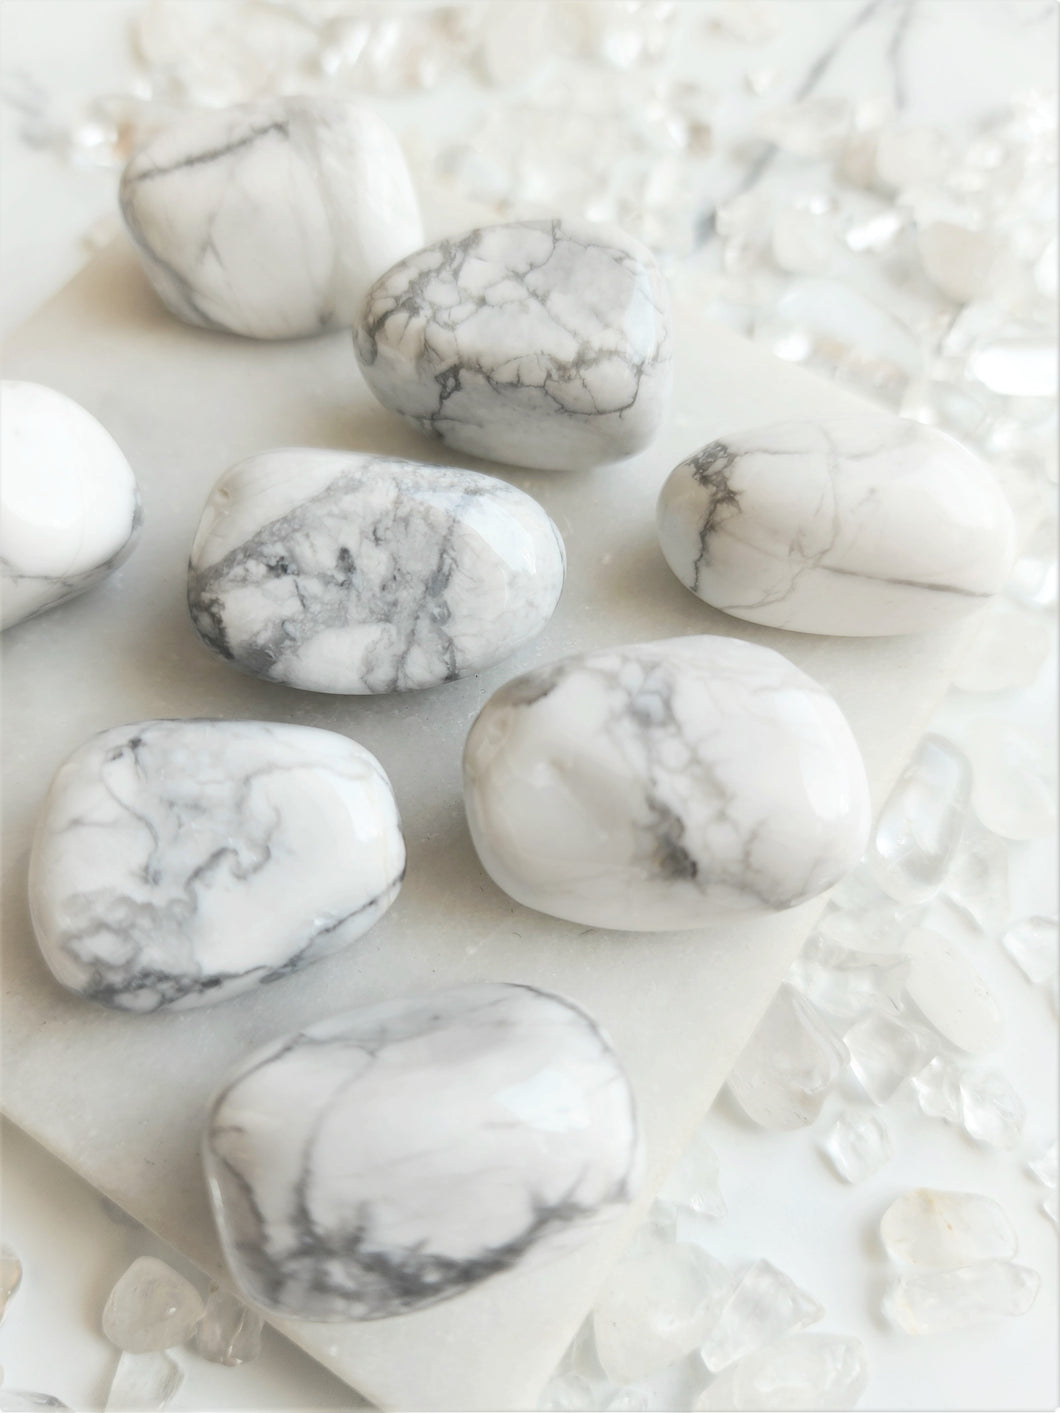 Howlite encourages you to express yourself freely and improves your communication. Keep it close to experience its soothing energies that support a good night's sleep